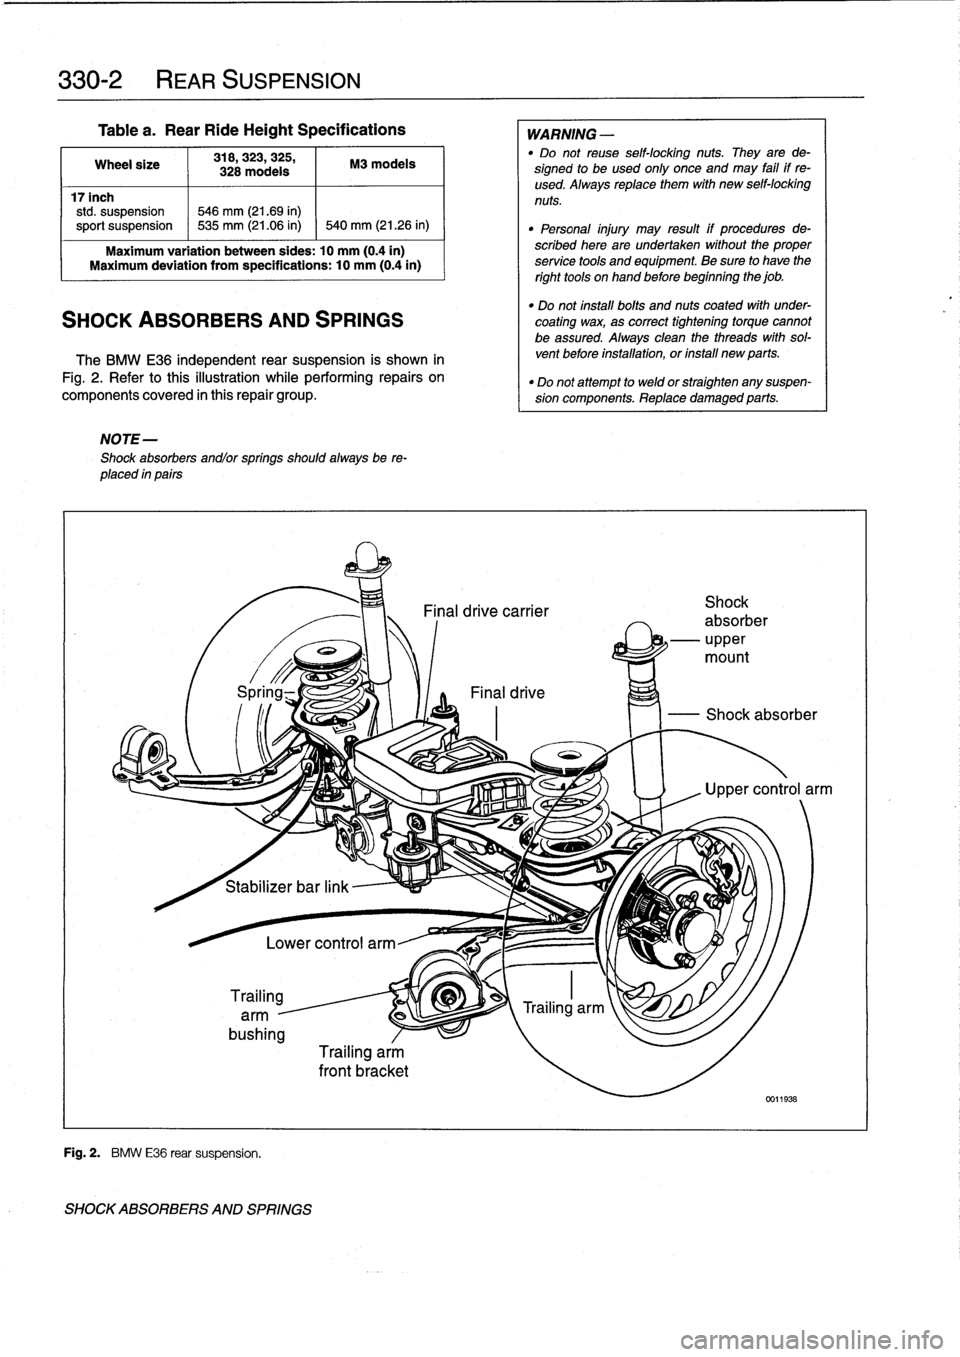 BMW 325i 1994 E36 Workshop Manual 
330-2

	

REAR
SUSPENSION

Table
a
.
Rear
RideHeight
Specifications

Wheel
size

	

318,323,
325,

	

M3
modeis
328
modeis

17inch
std
.
suspension

	

546
mm
(21.69
in)
sport
suspension

	

~
535
mm